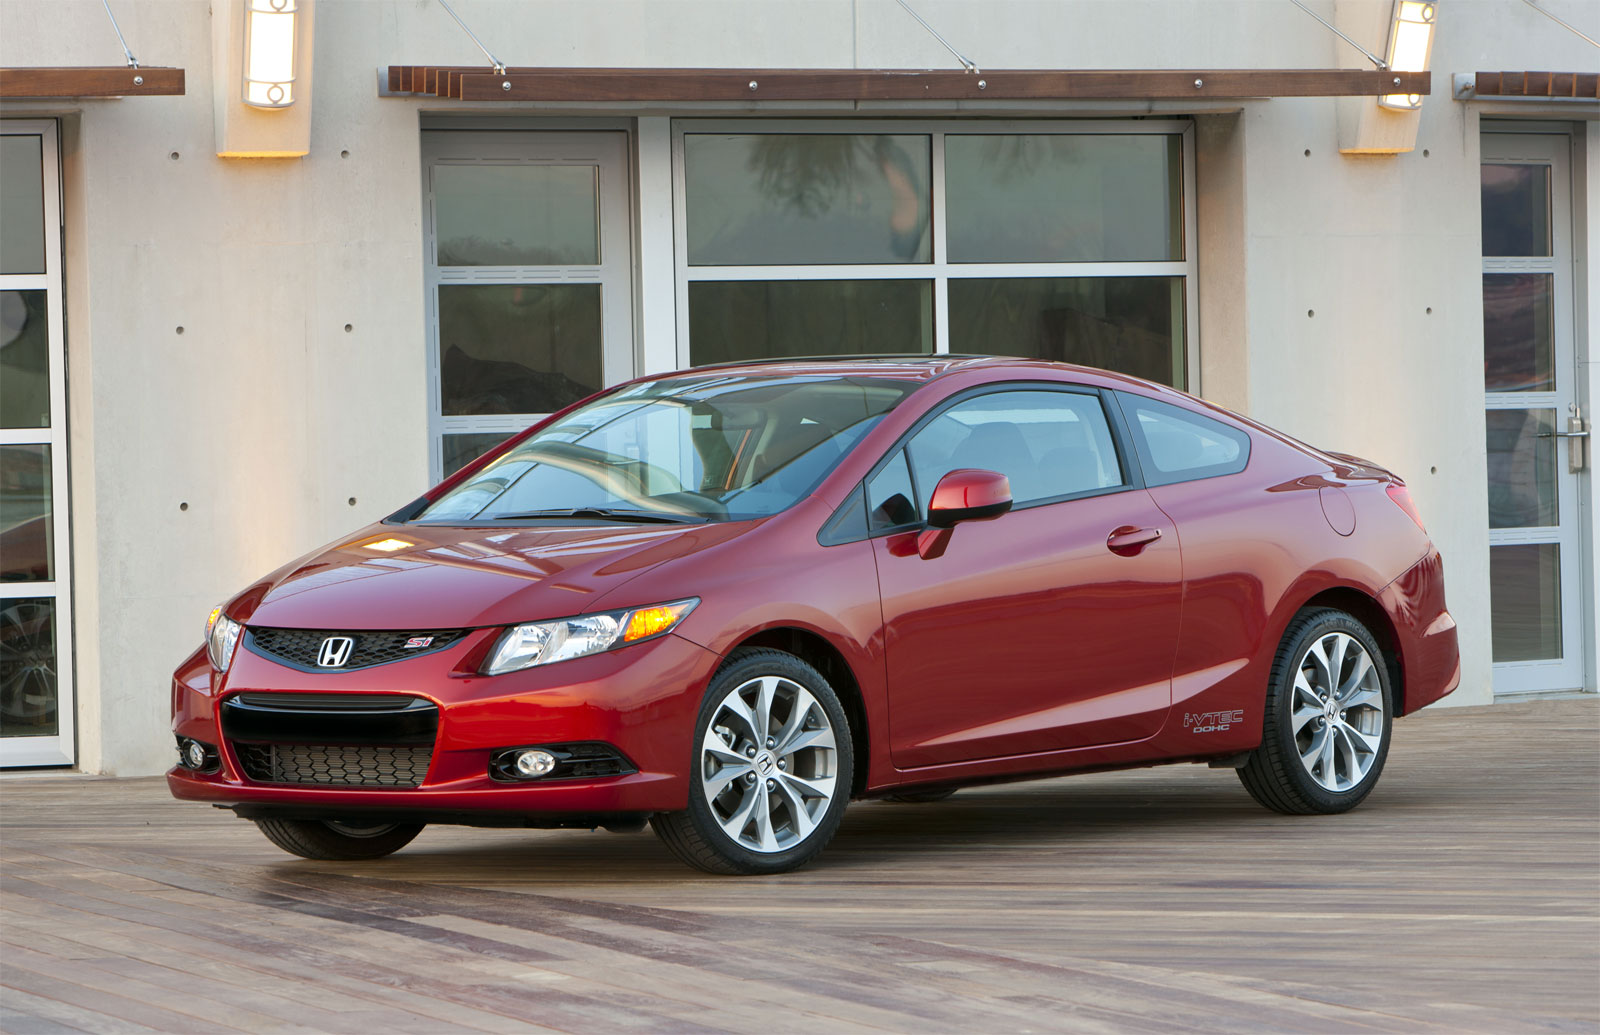 2012 Honda Civic Si Coupe Pictures-Car Wallpaper ,Car Pictures